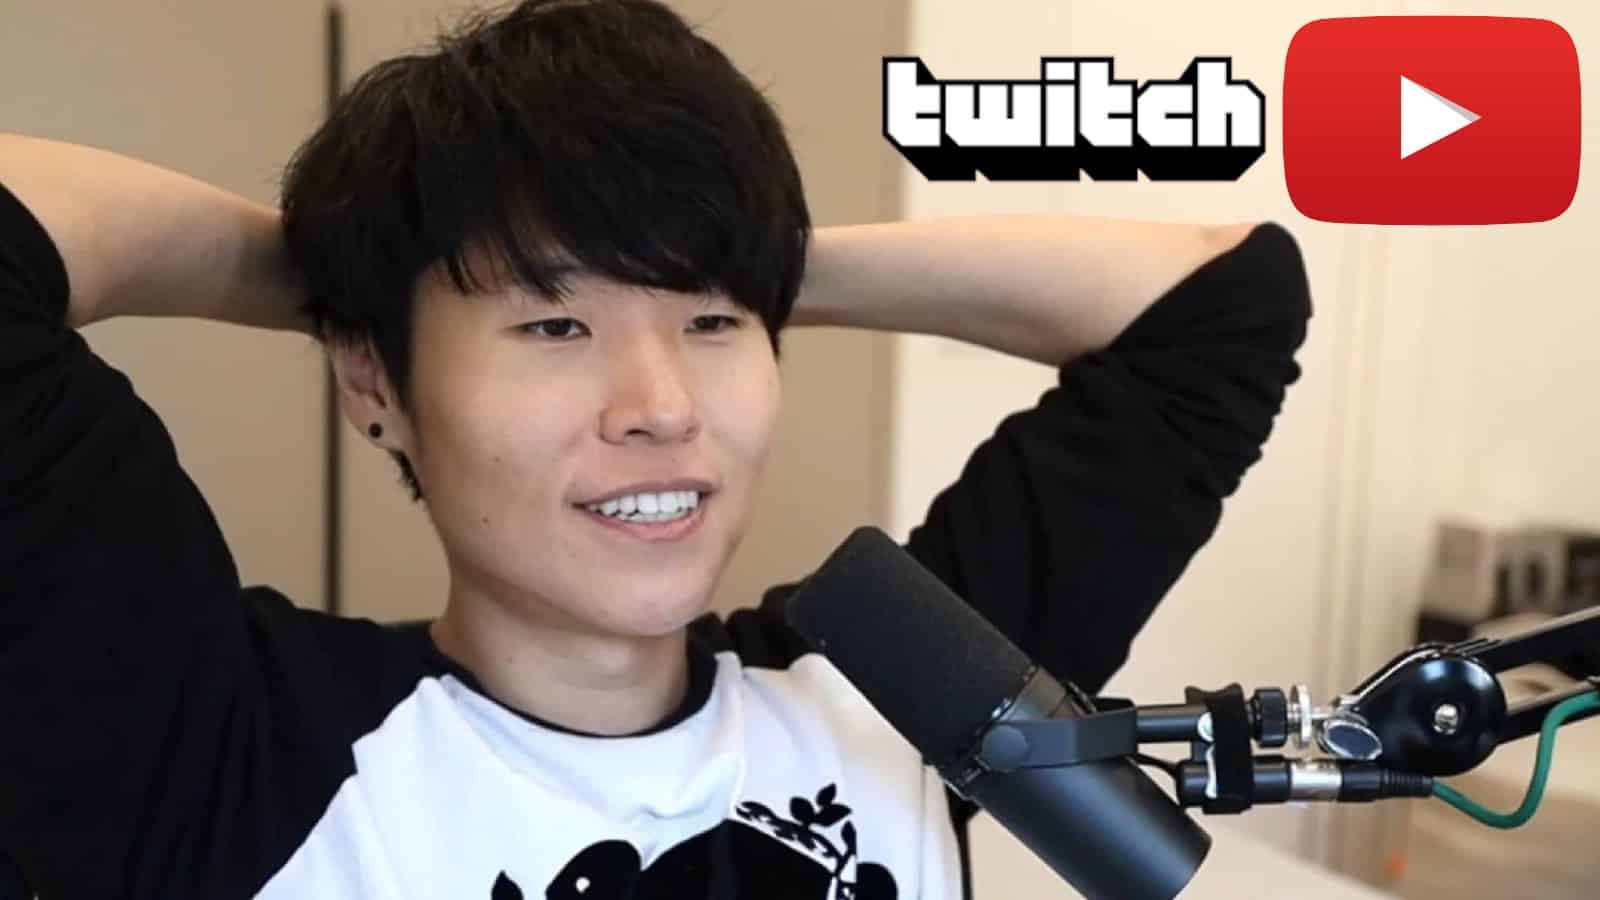 DisguisedToast reveals Twitch streamers moving to youtube